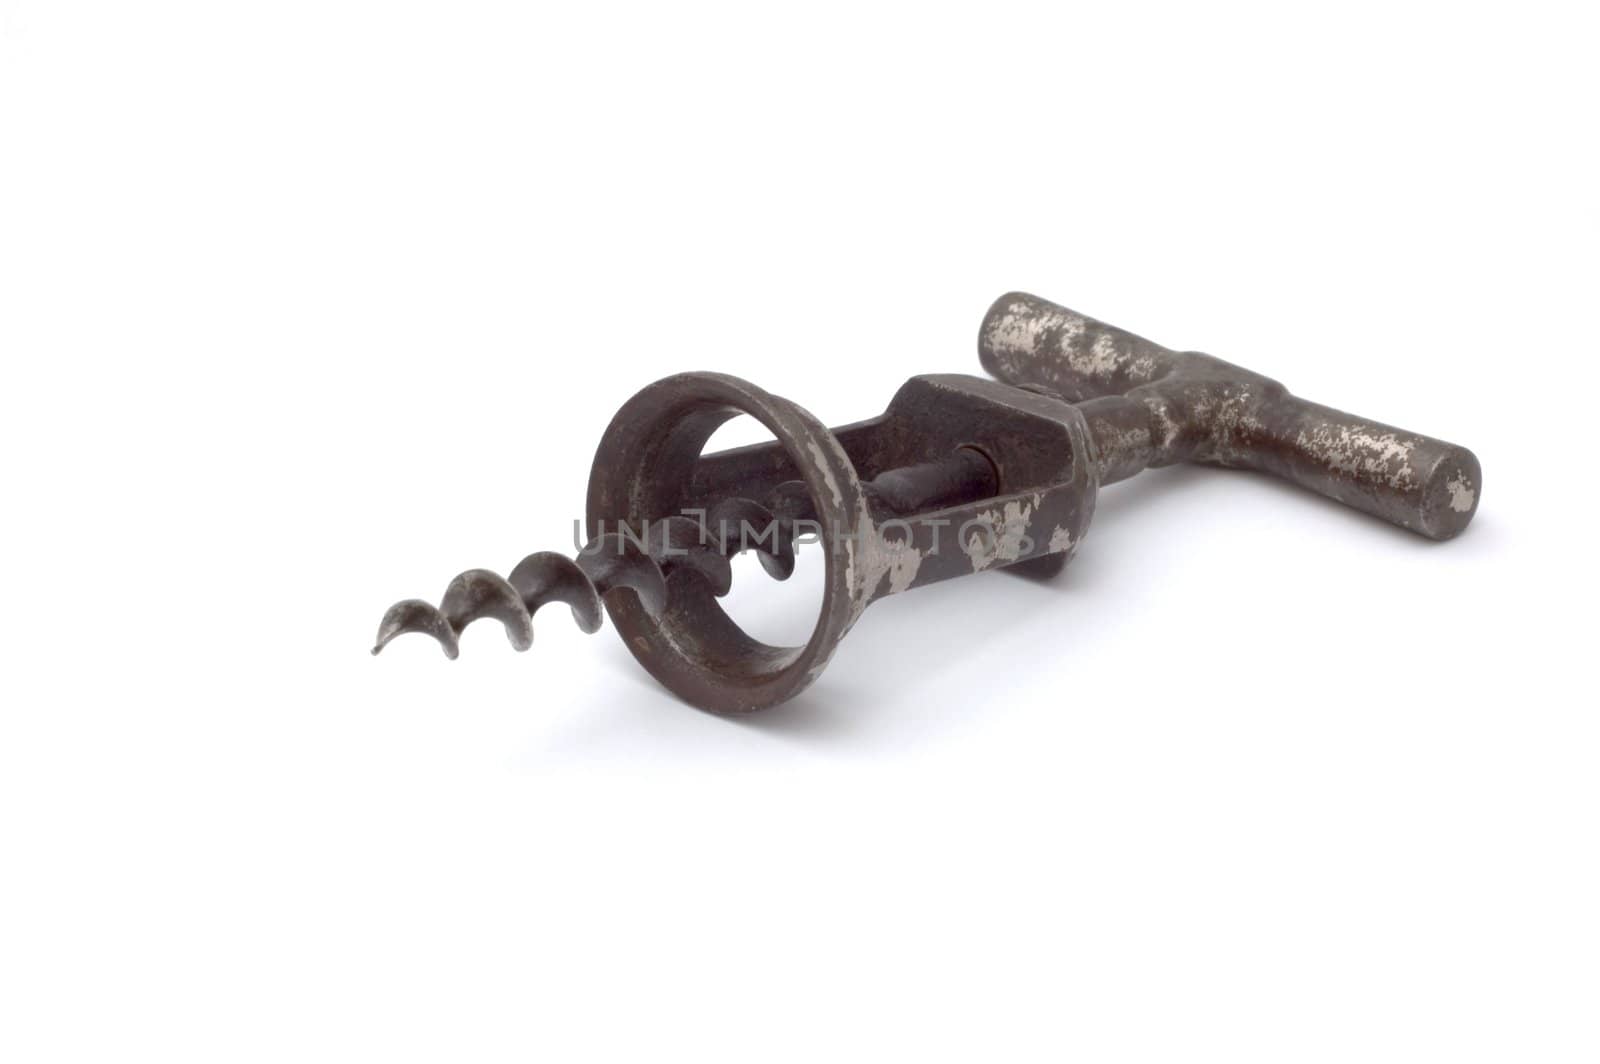 an old corkscrew on white background